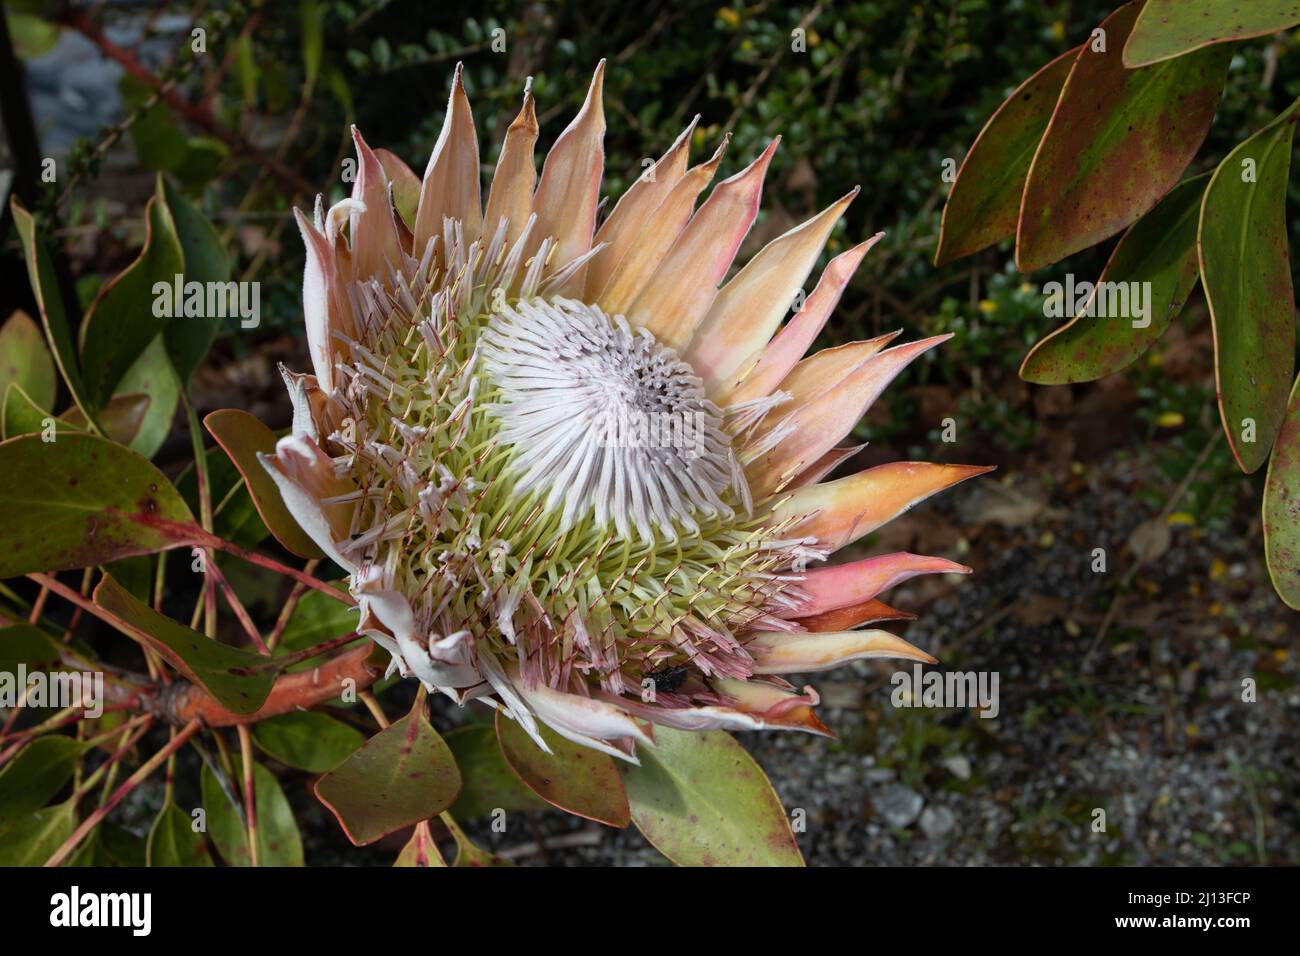 Protea cynaroides bloom. King sugar bush flower head. National flower of the South Africa. Stock Photo